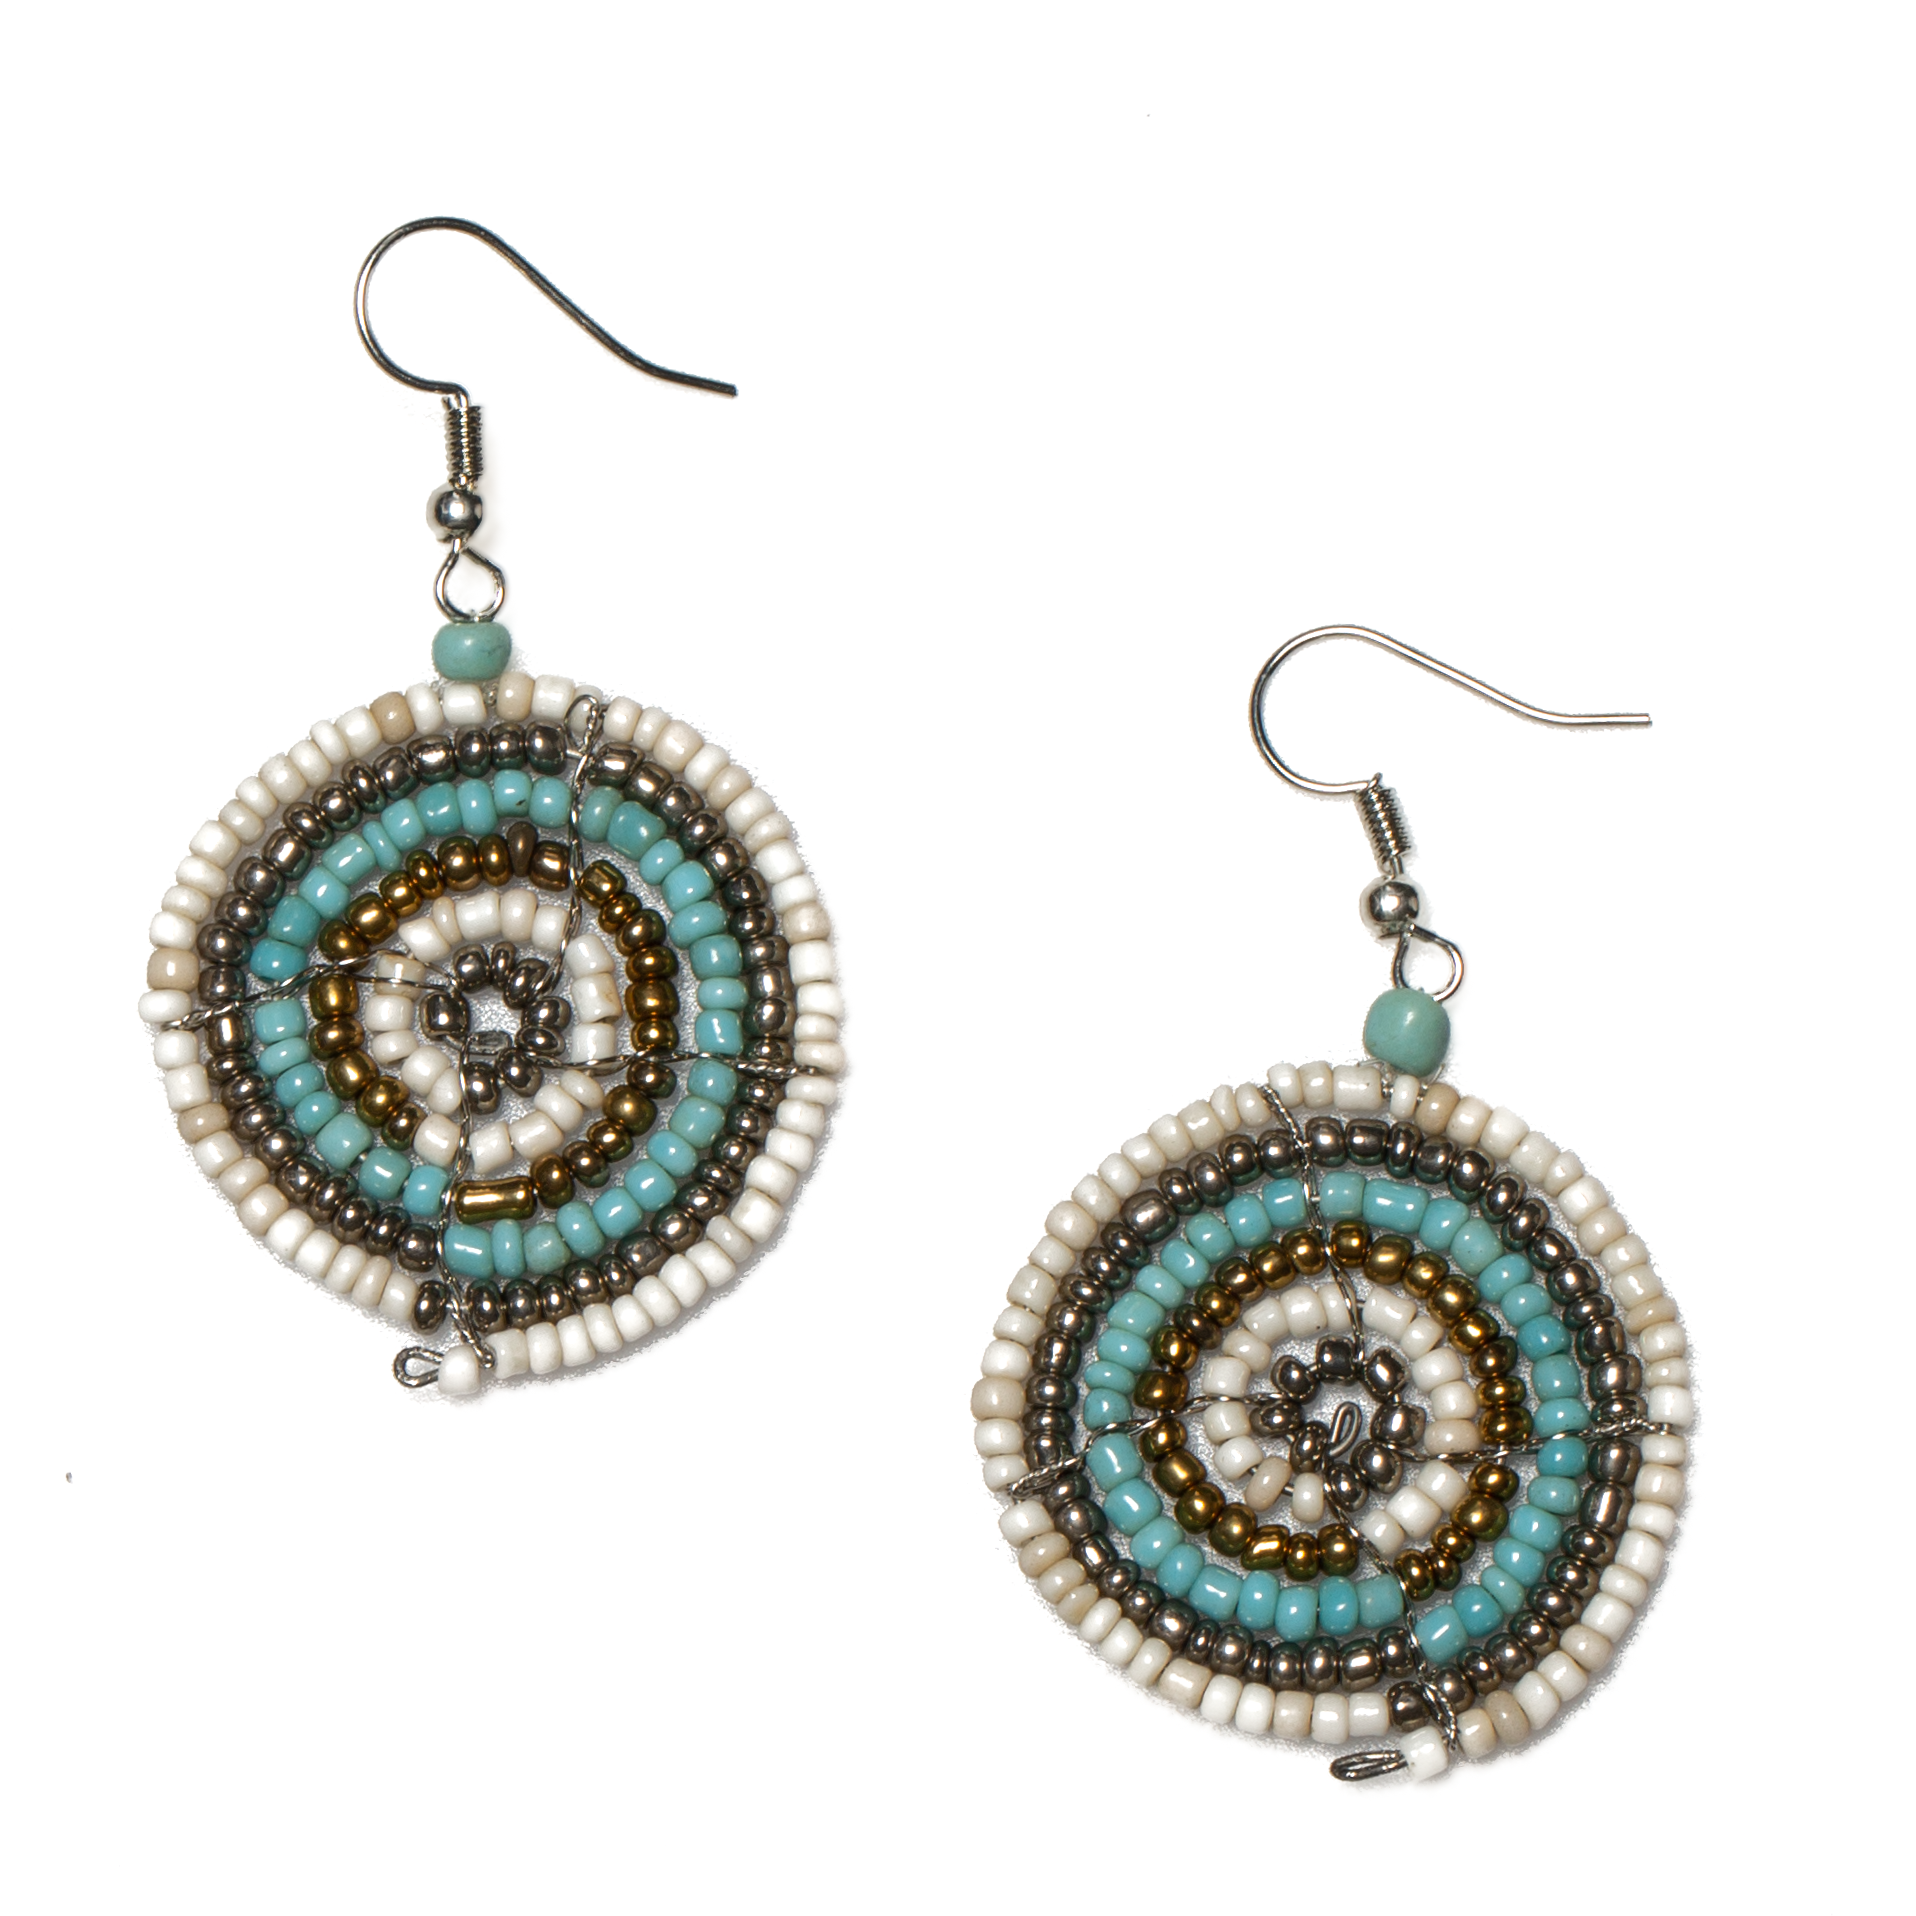 Turquoise and White Beaded Circle Earrings